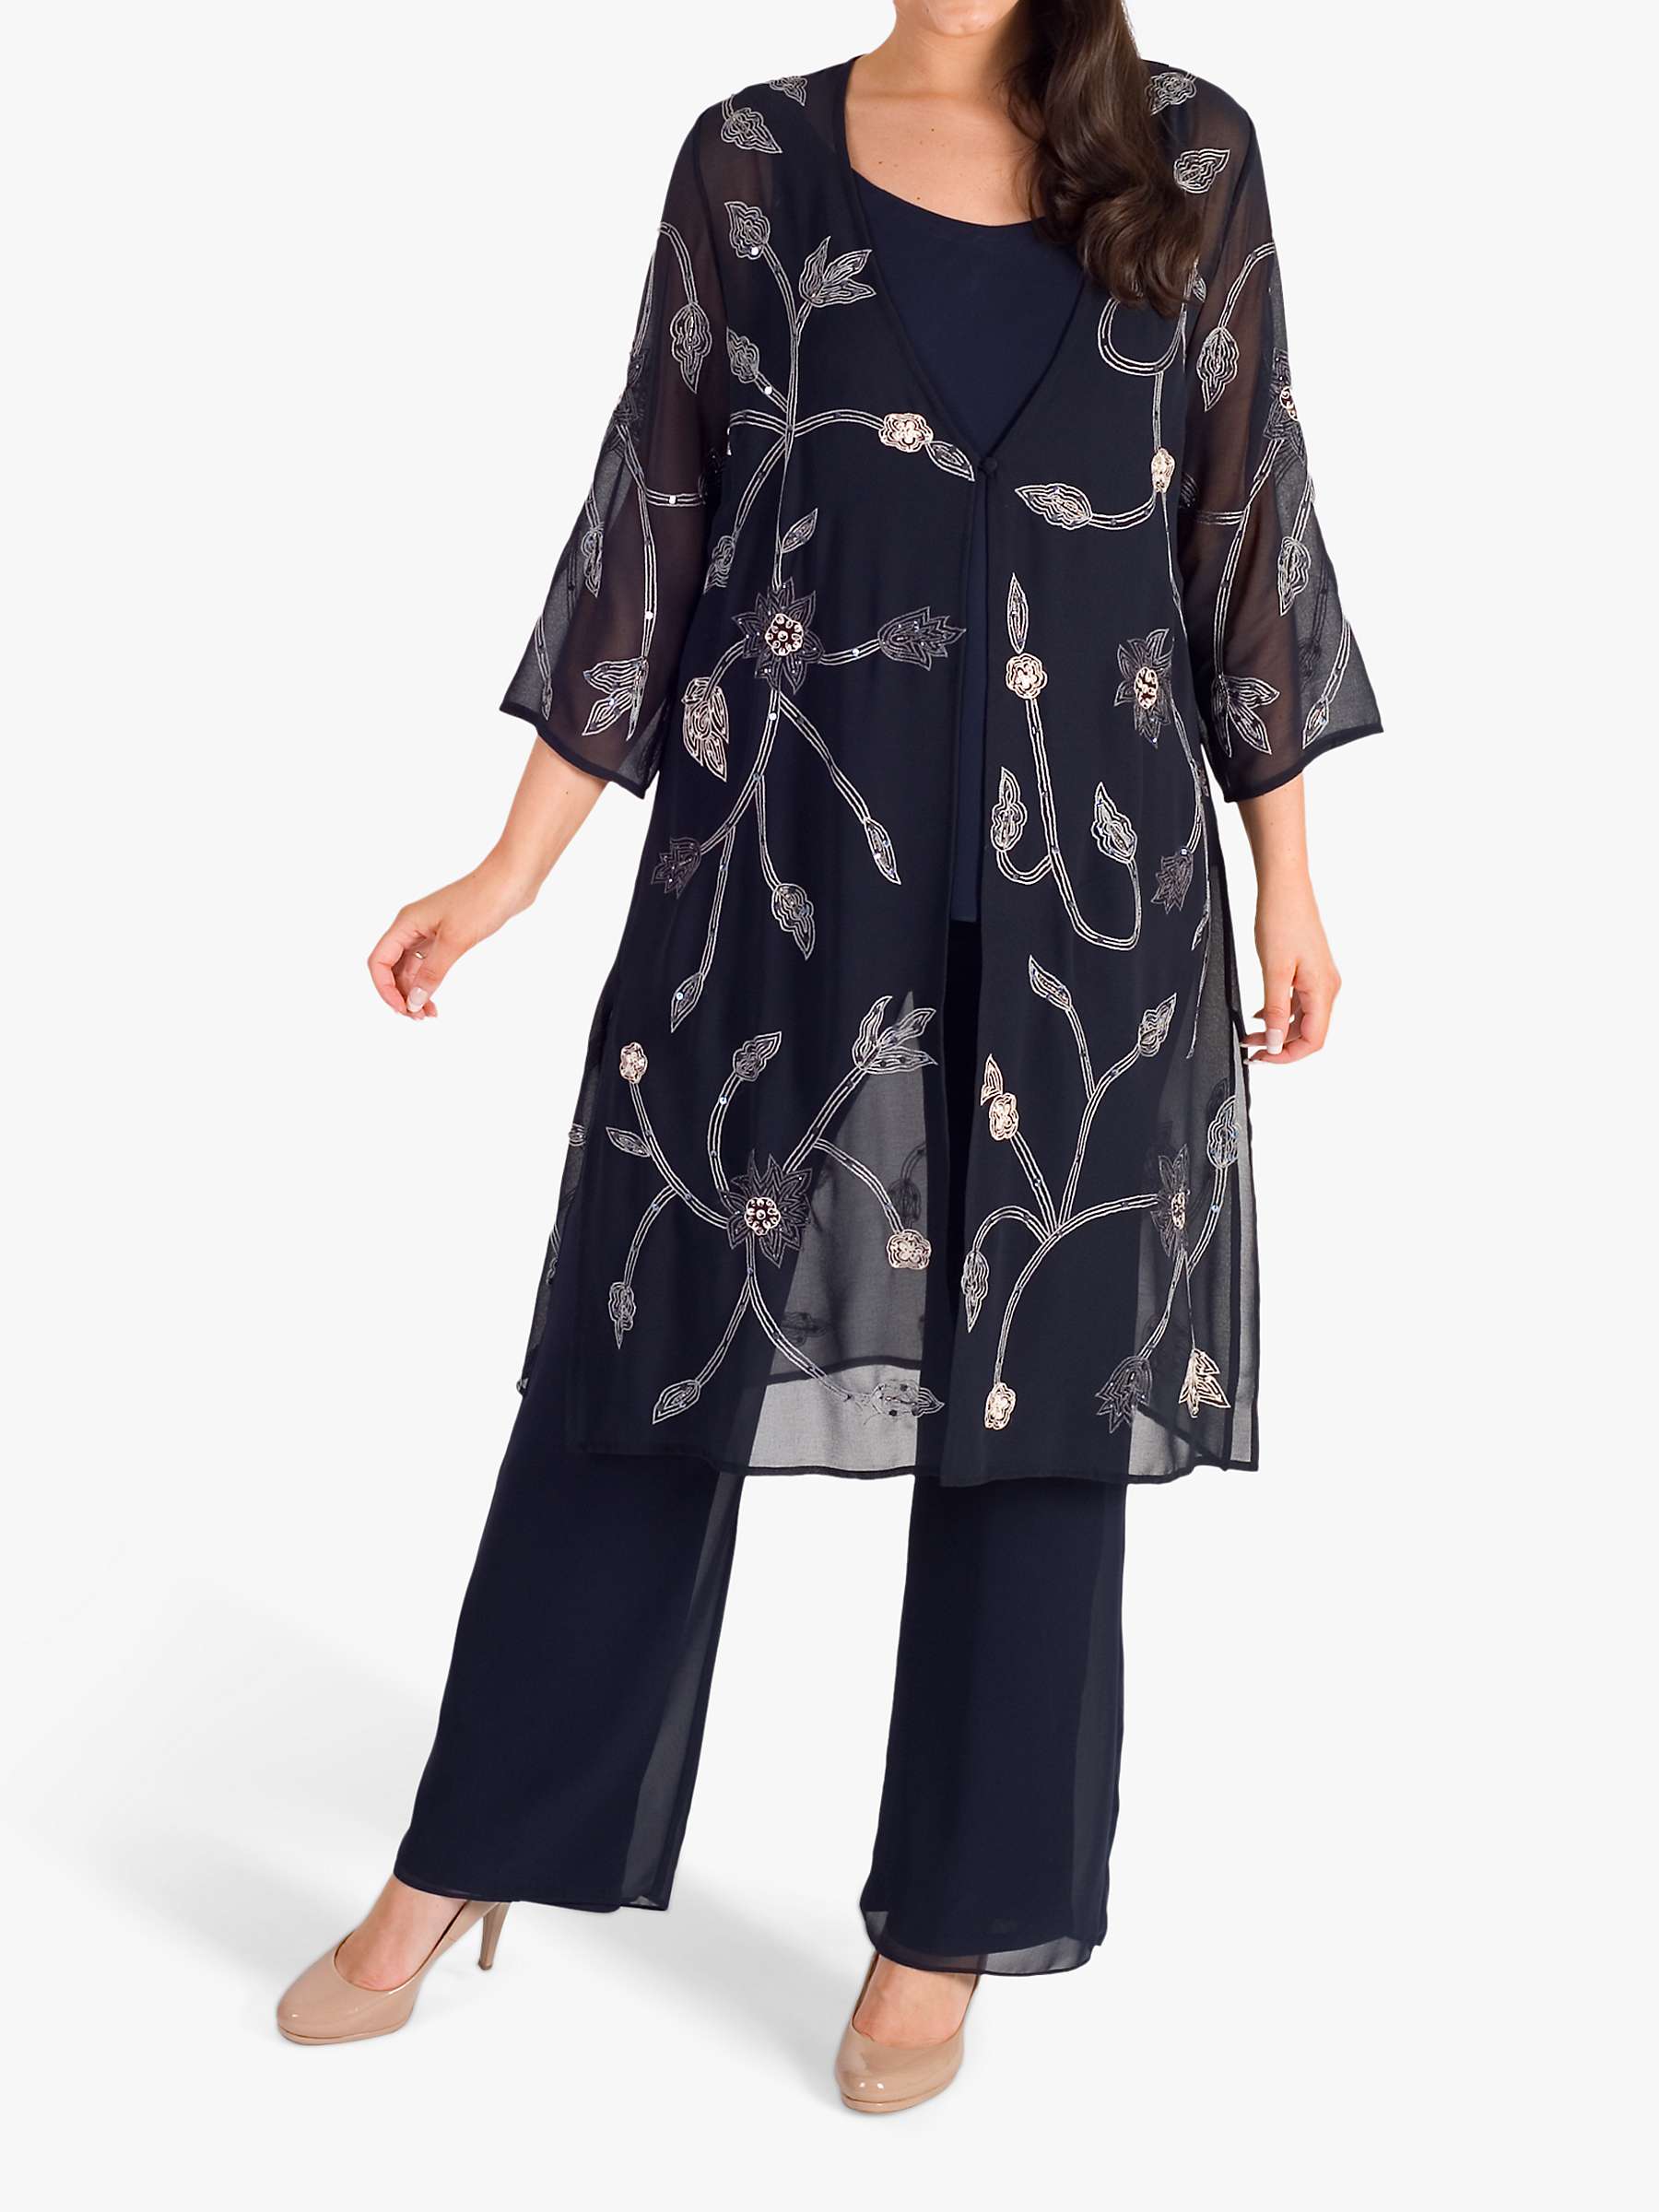 Chesca Embroidered Chiffon Coat, Navy at John Lewis & Partners